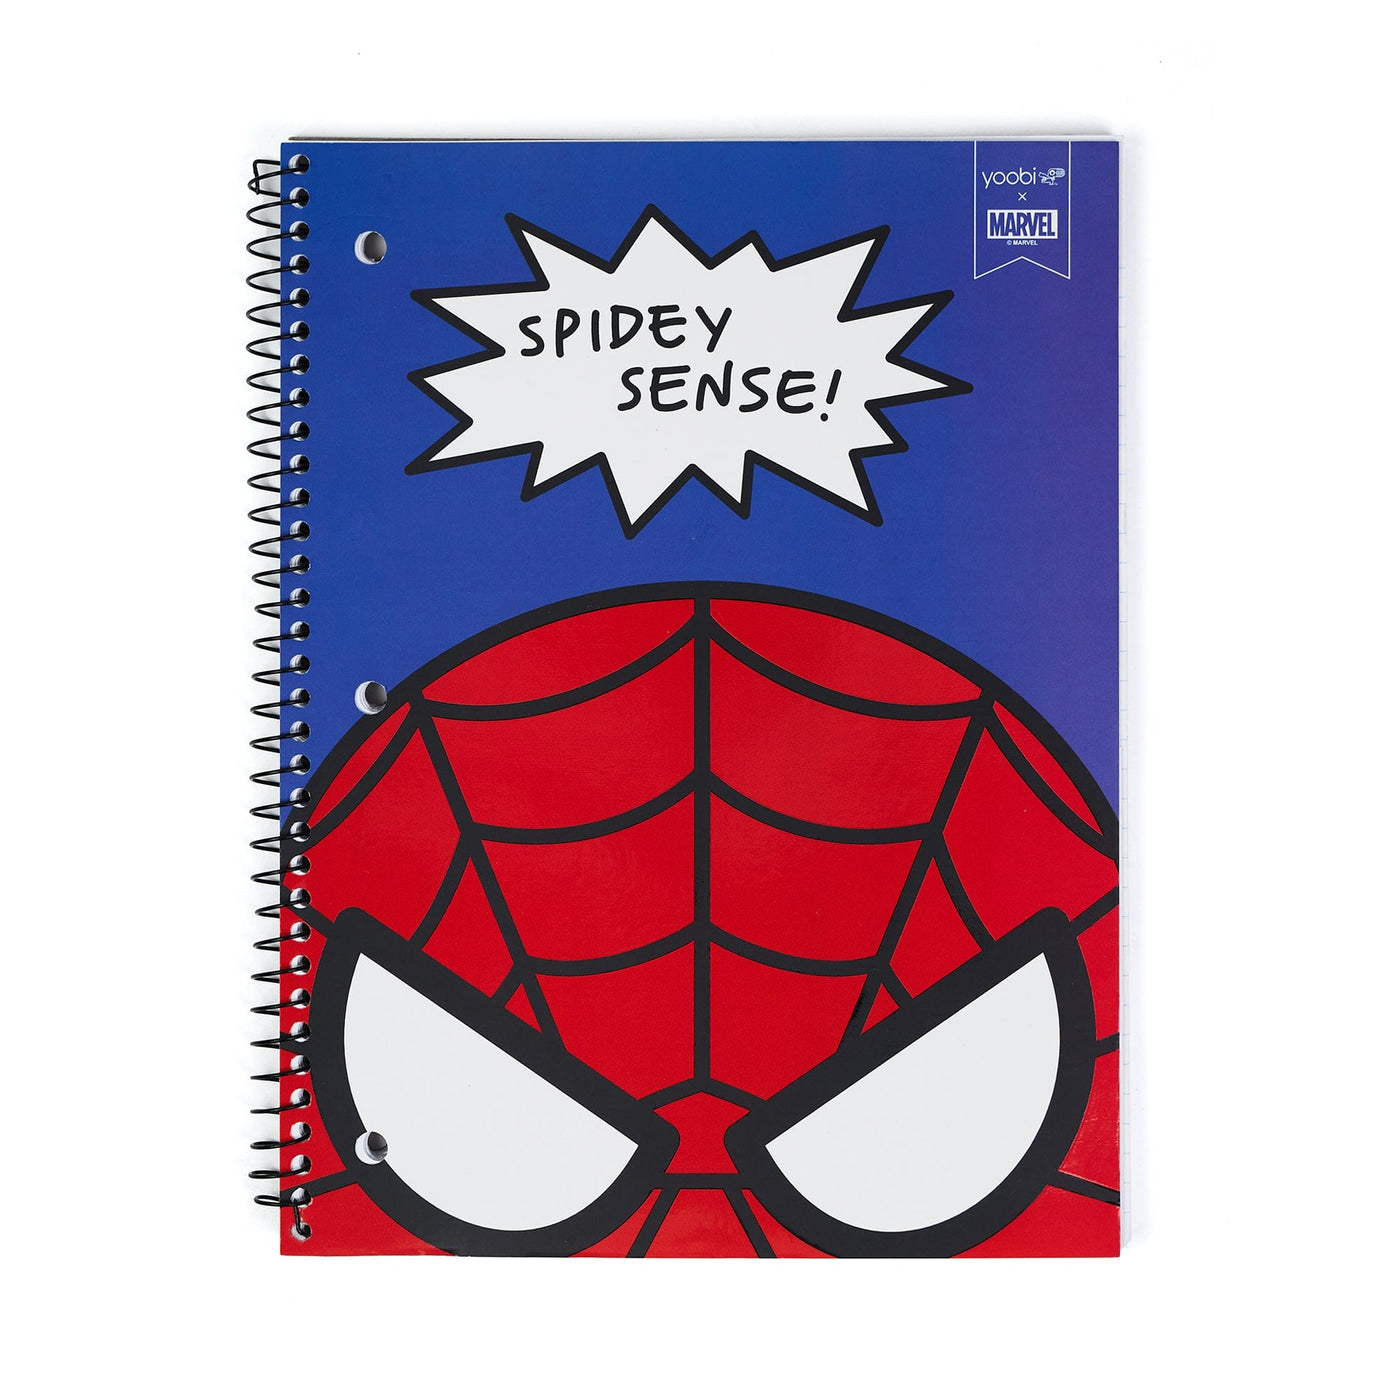 Blue one subject spiral notebook with Spider-Man character and SPIDEY SENSE! speech bubble on front cover